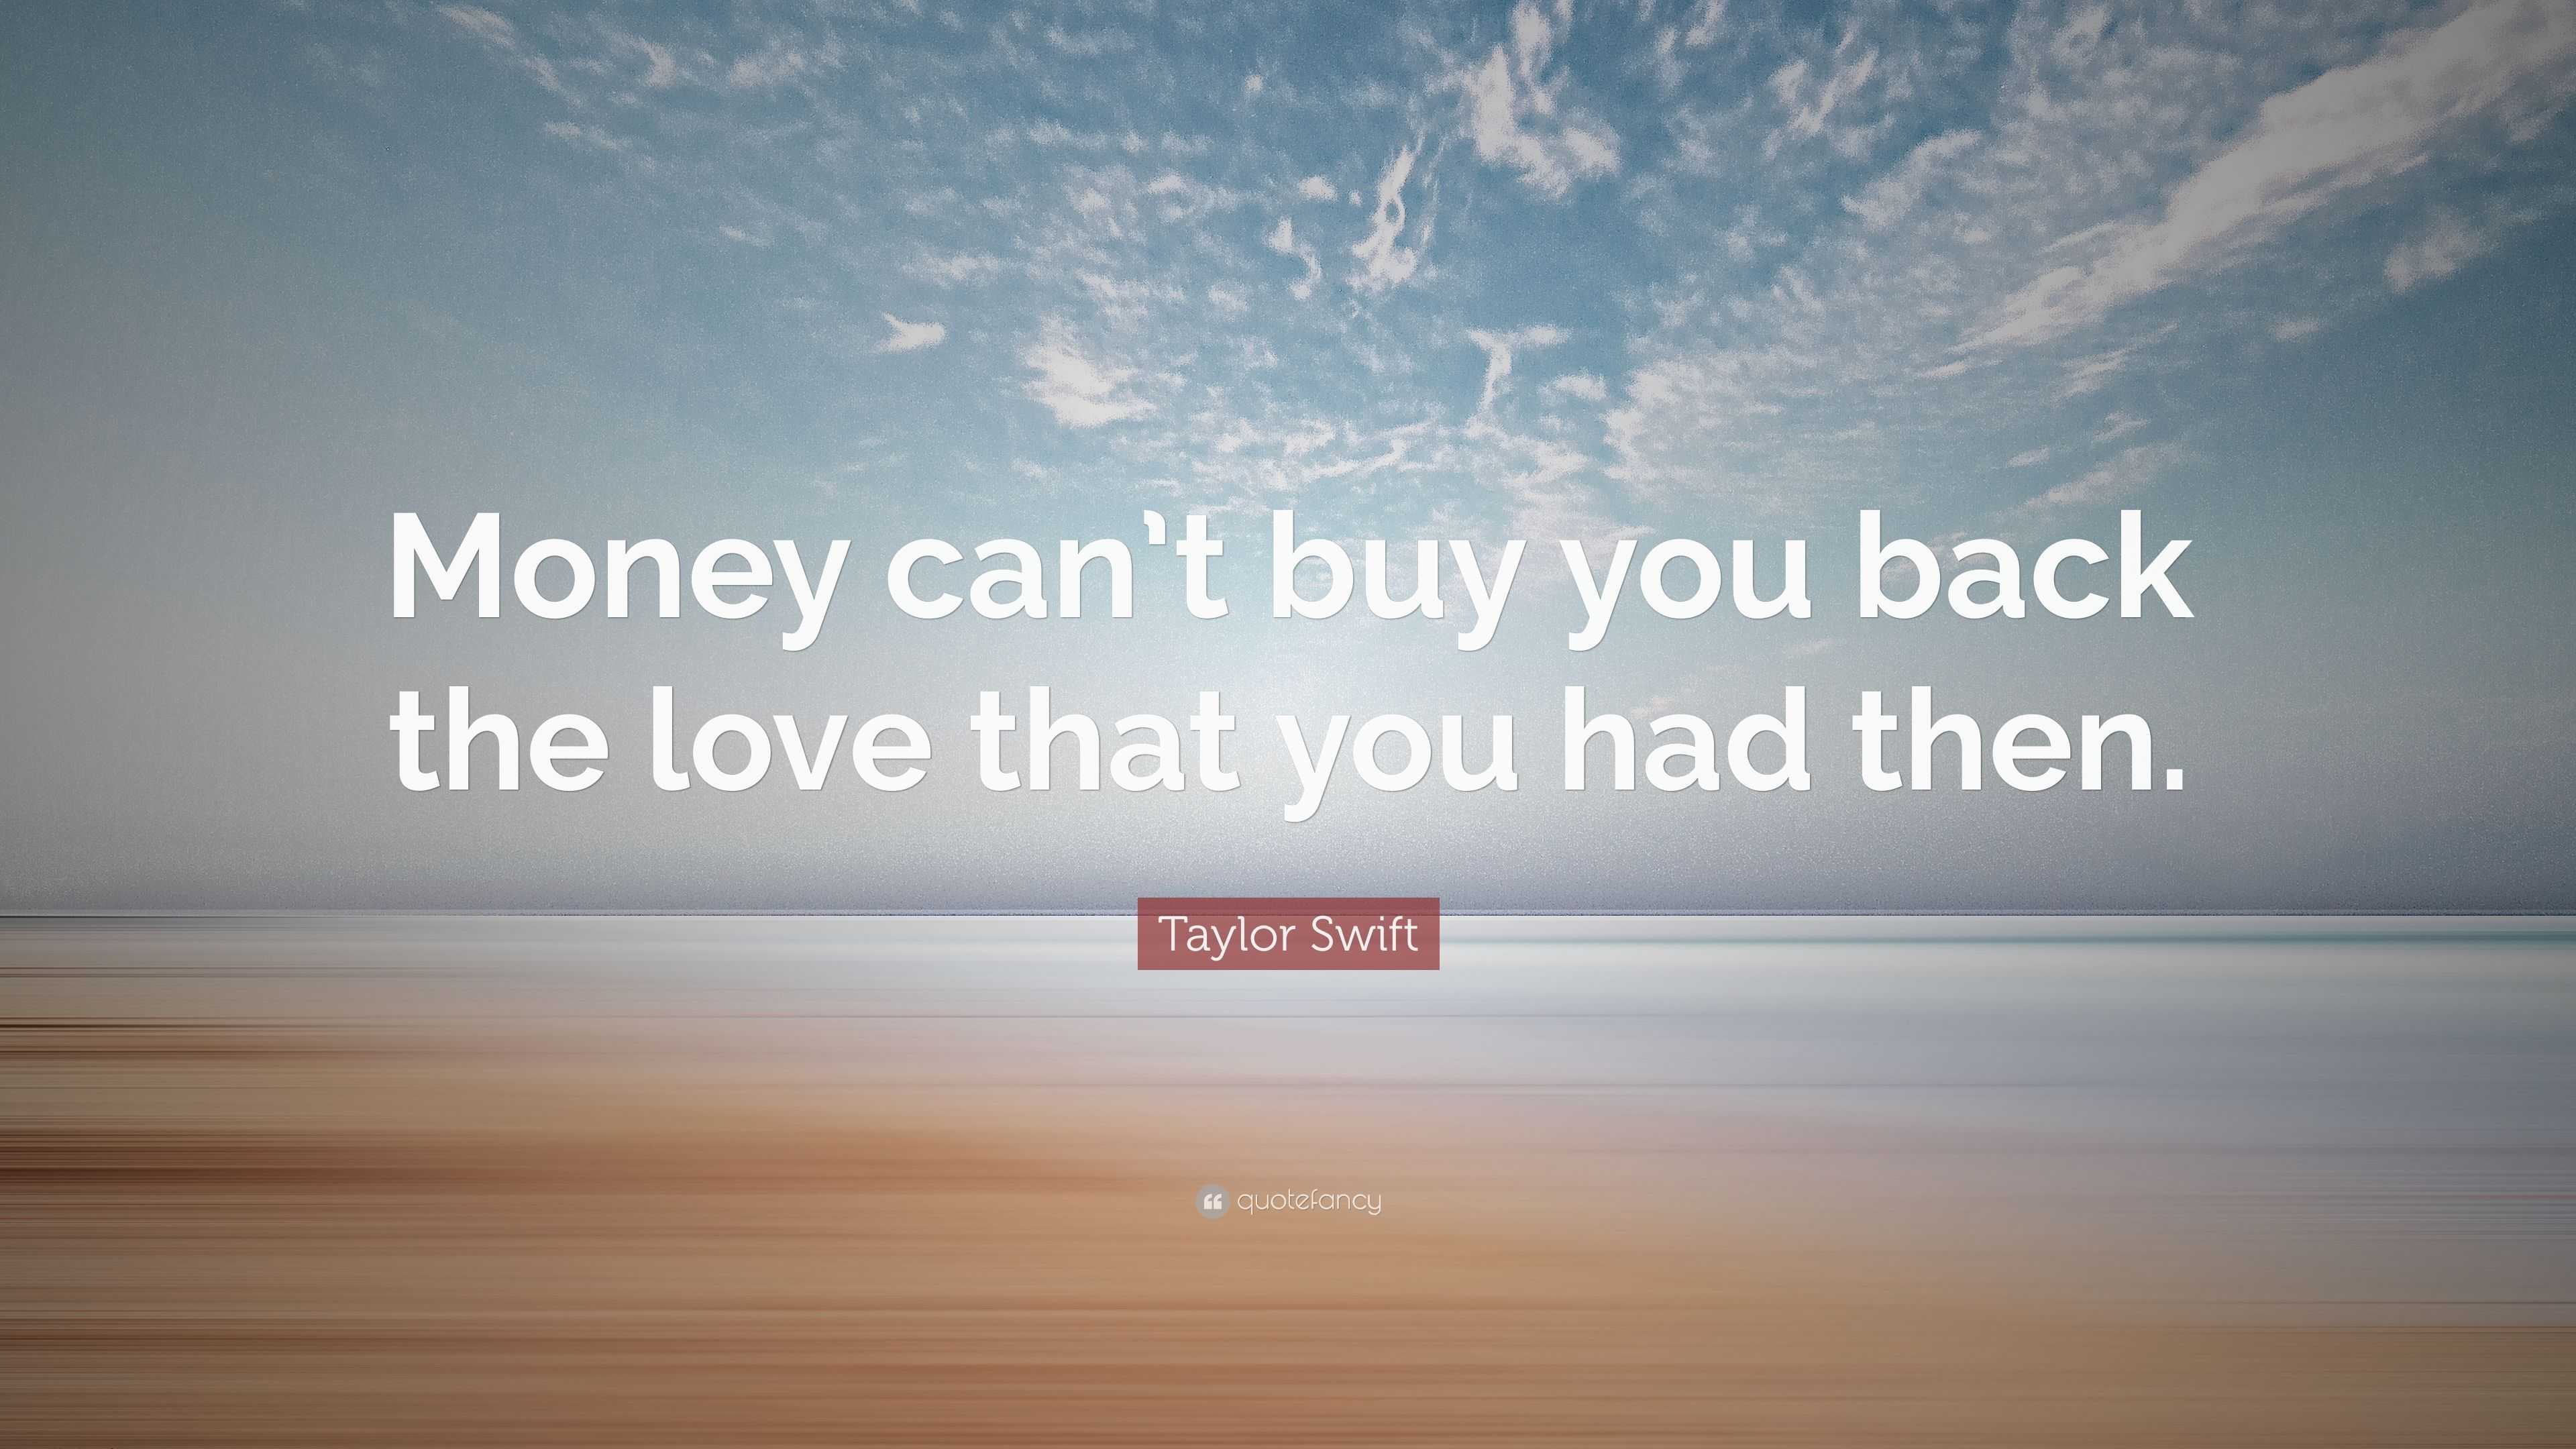 Taylor Swift Quote “Money can t you back the love that you